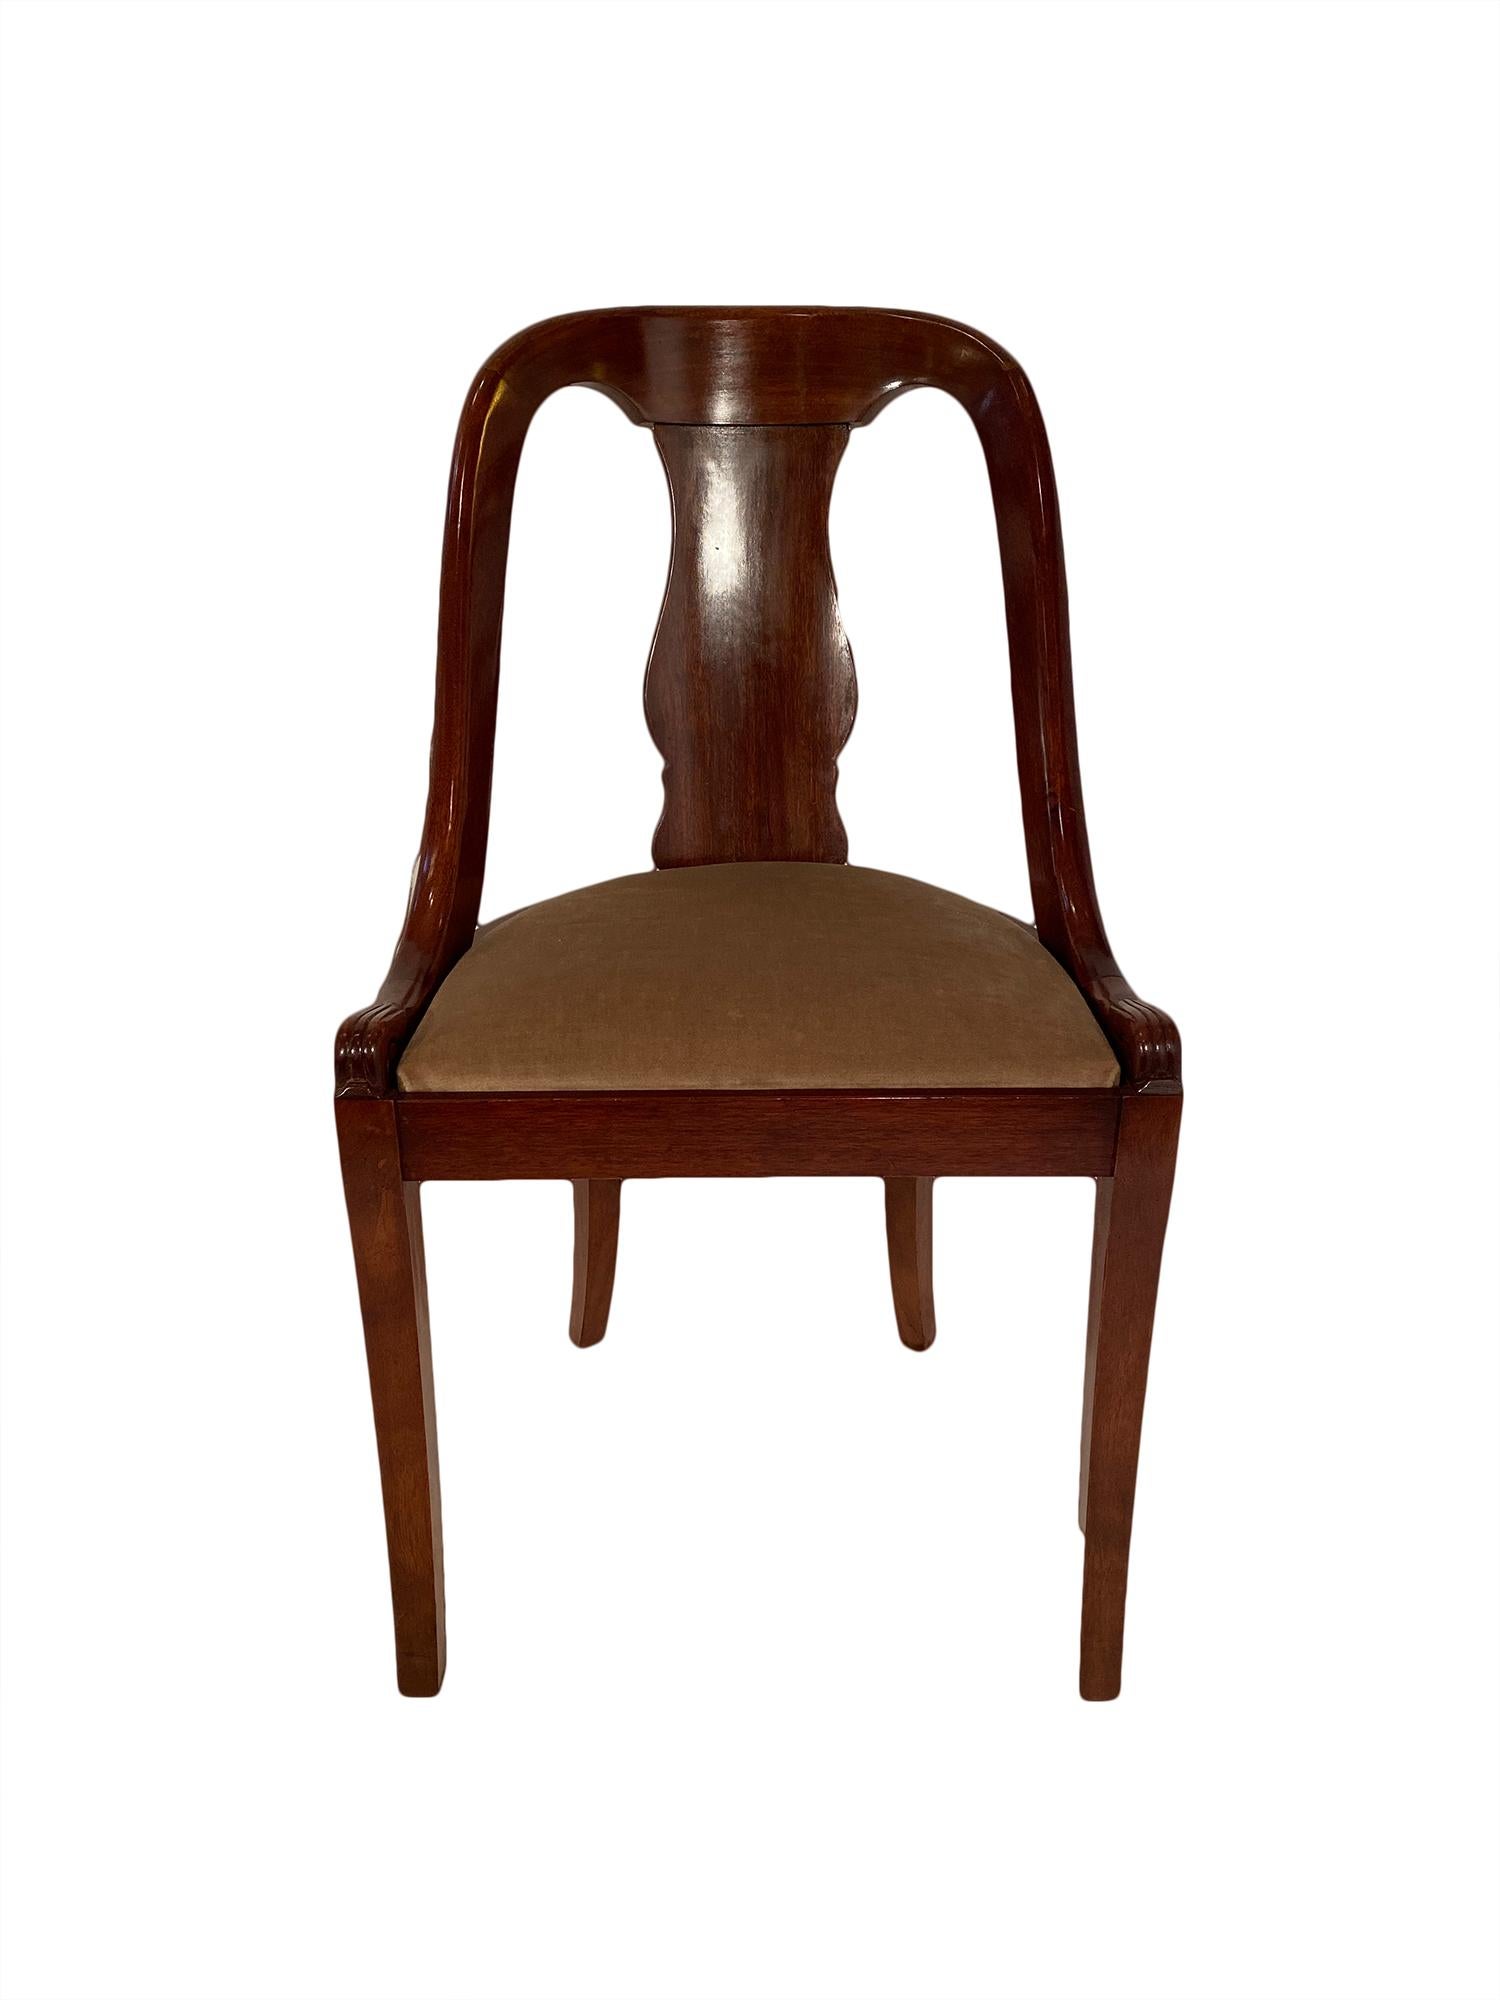 Set of eight French Empire gondola chairs made of solid mahogany and featuring sabre back legs, console front legs. We love the solidity of this set and the classic silhouette.